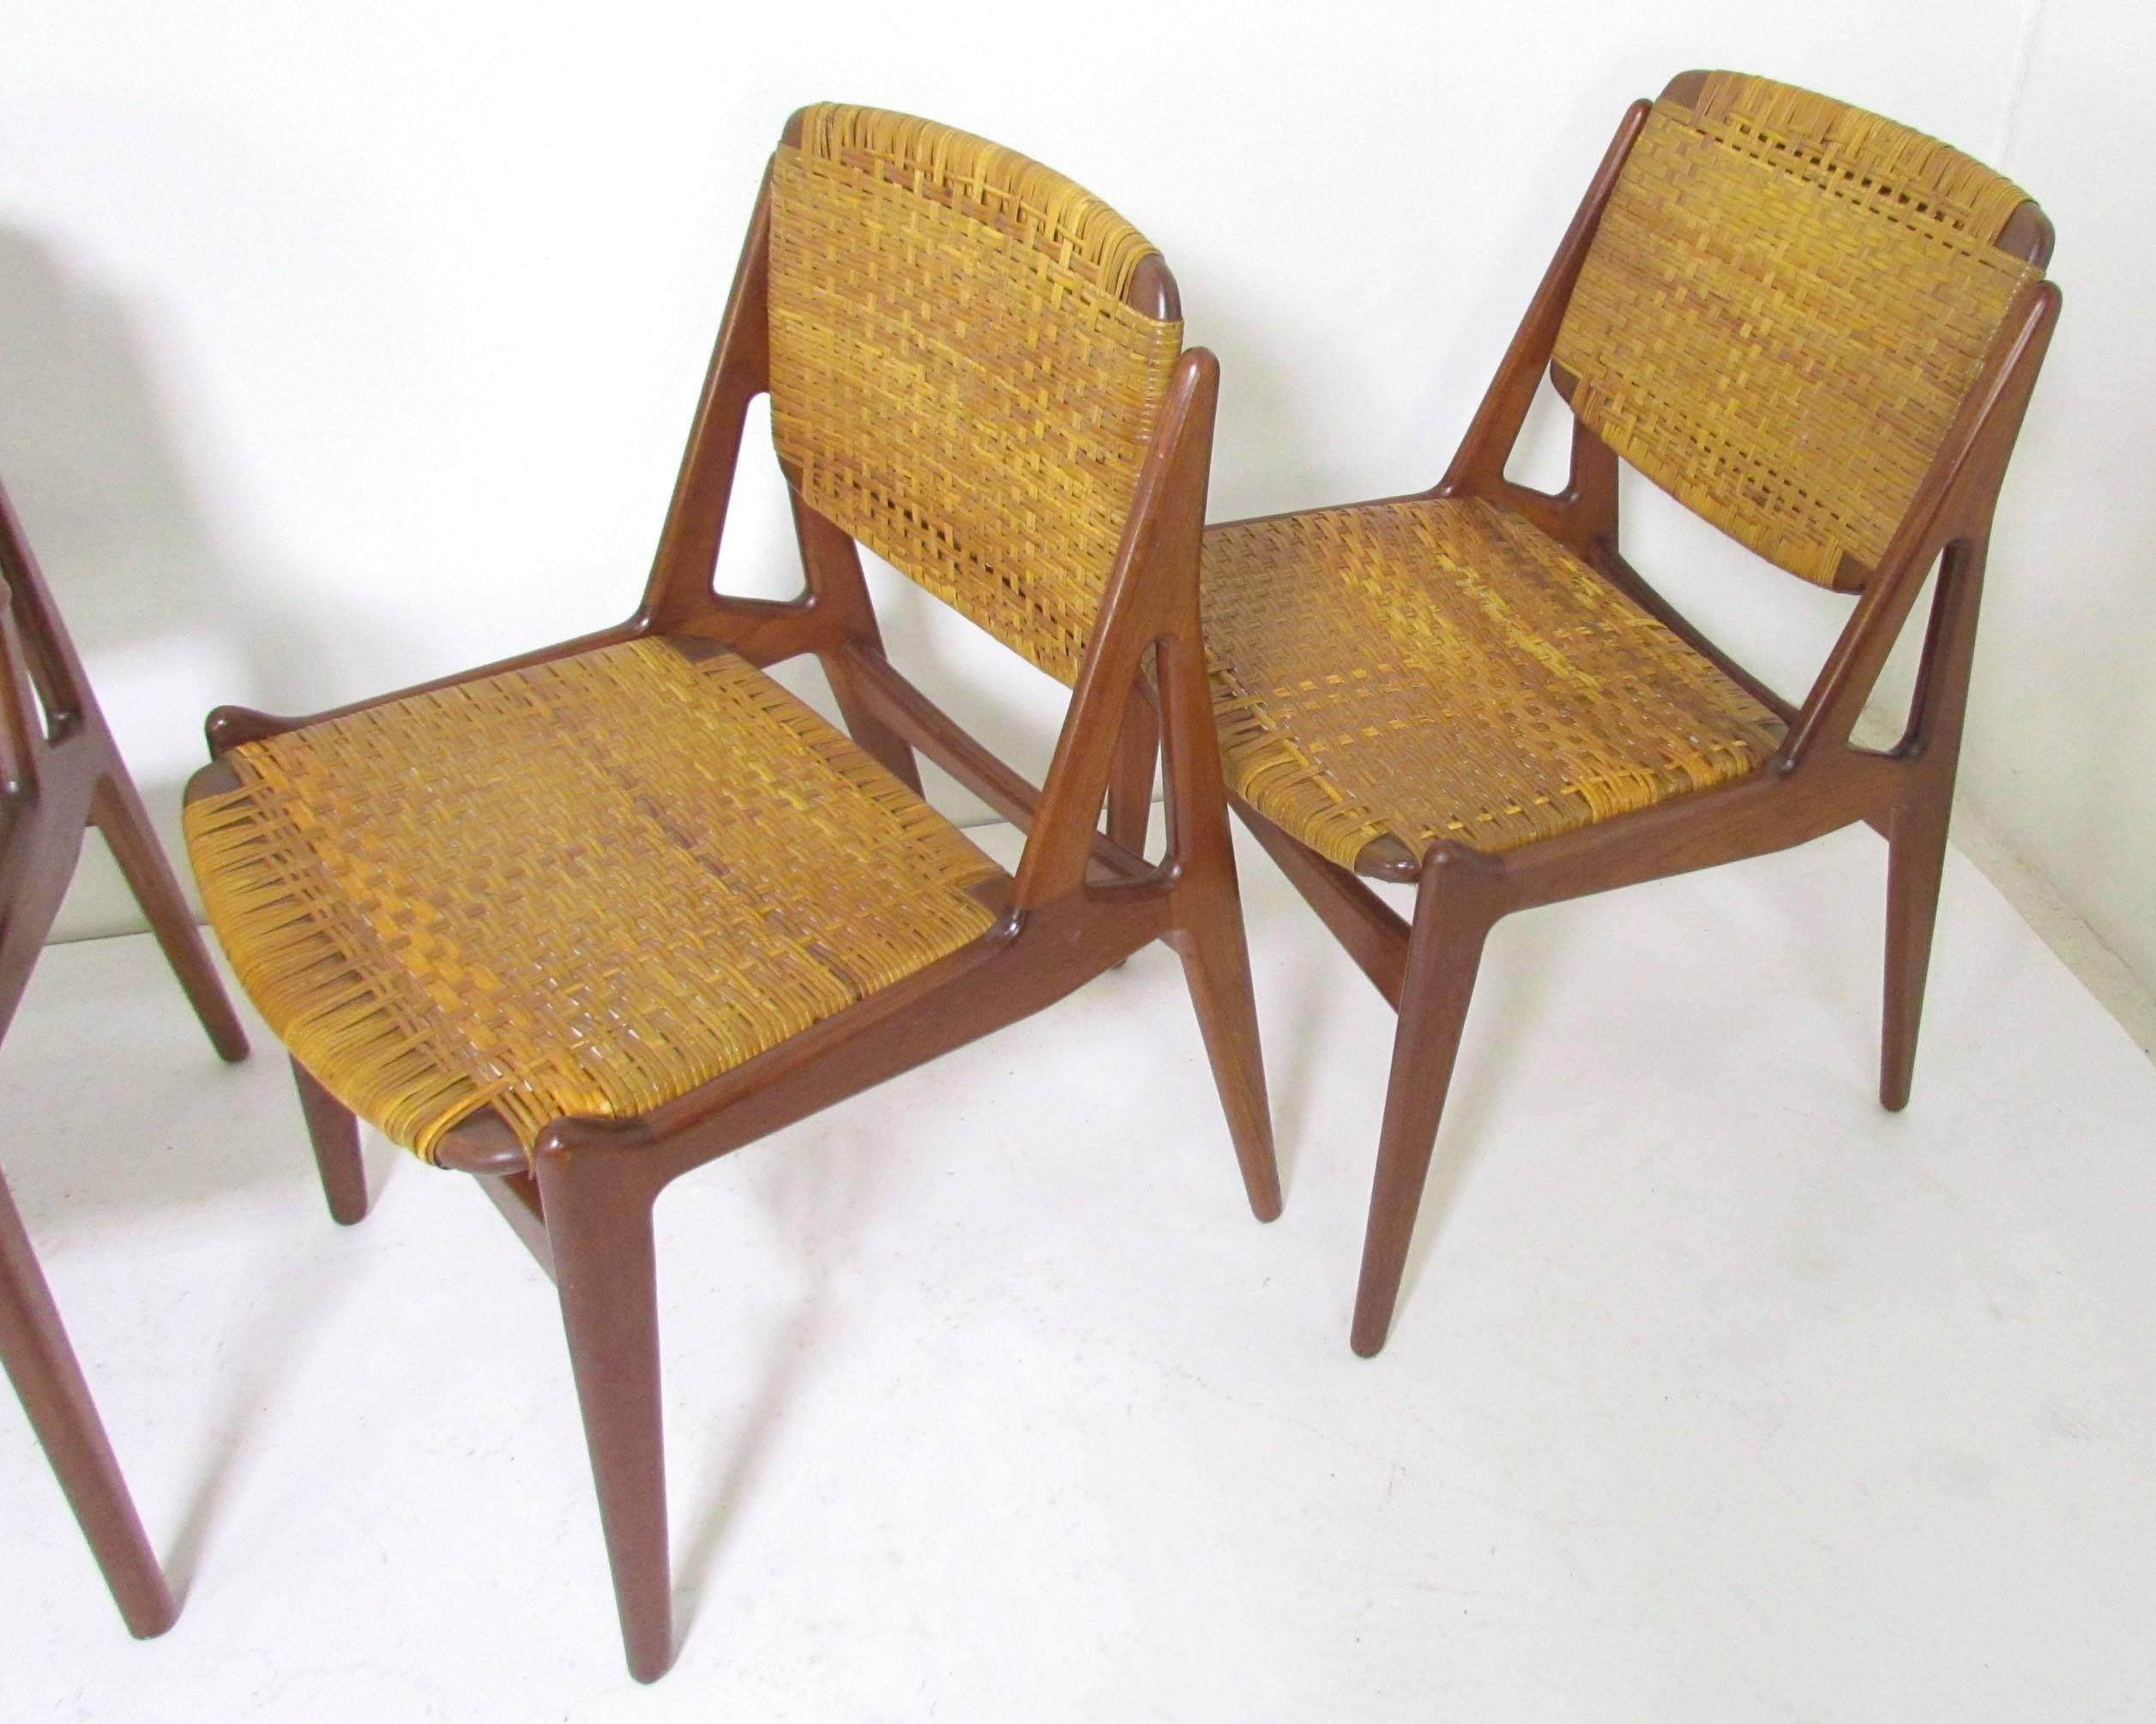 Set of five teak and cane "Ella" dining chairs (four side and one armchair) designed by Arne Vodder for Vamo Mobelfabrik, Denmark, circa 1960s. Extremely comfortable ergonomic design with pivoting seat backs that conform to sitter's